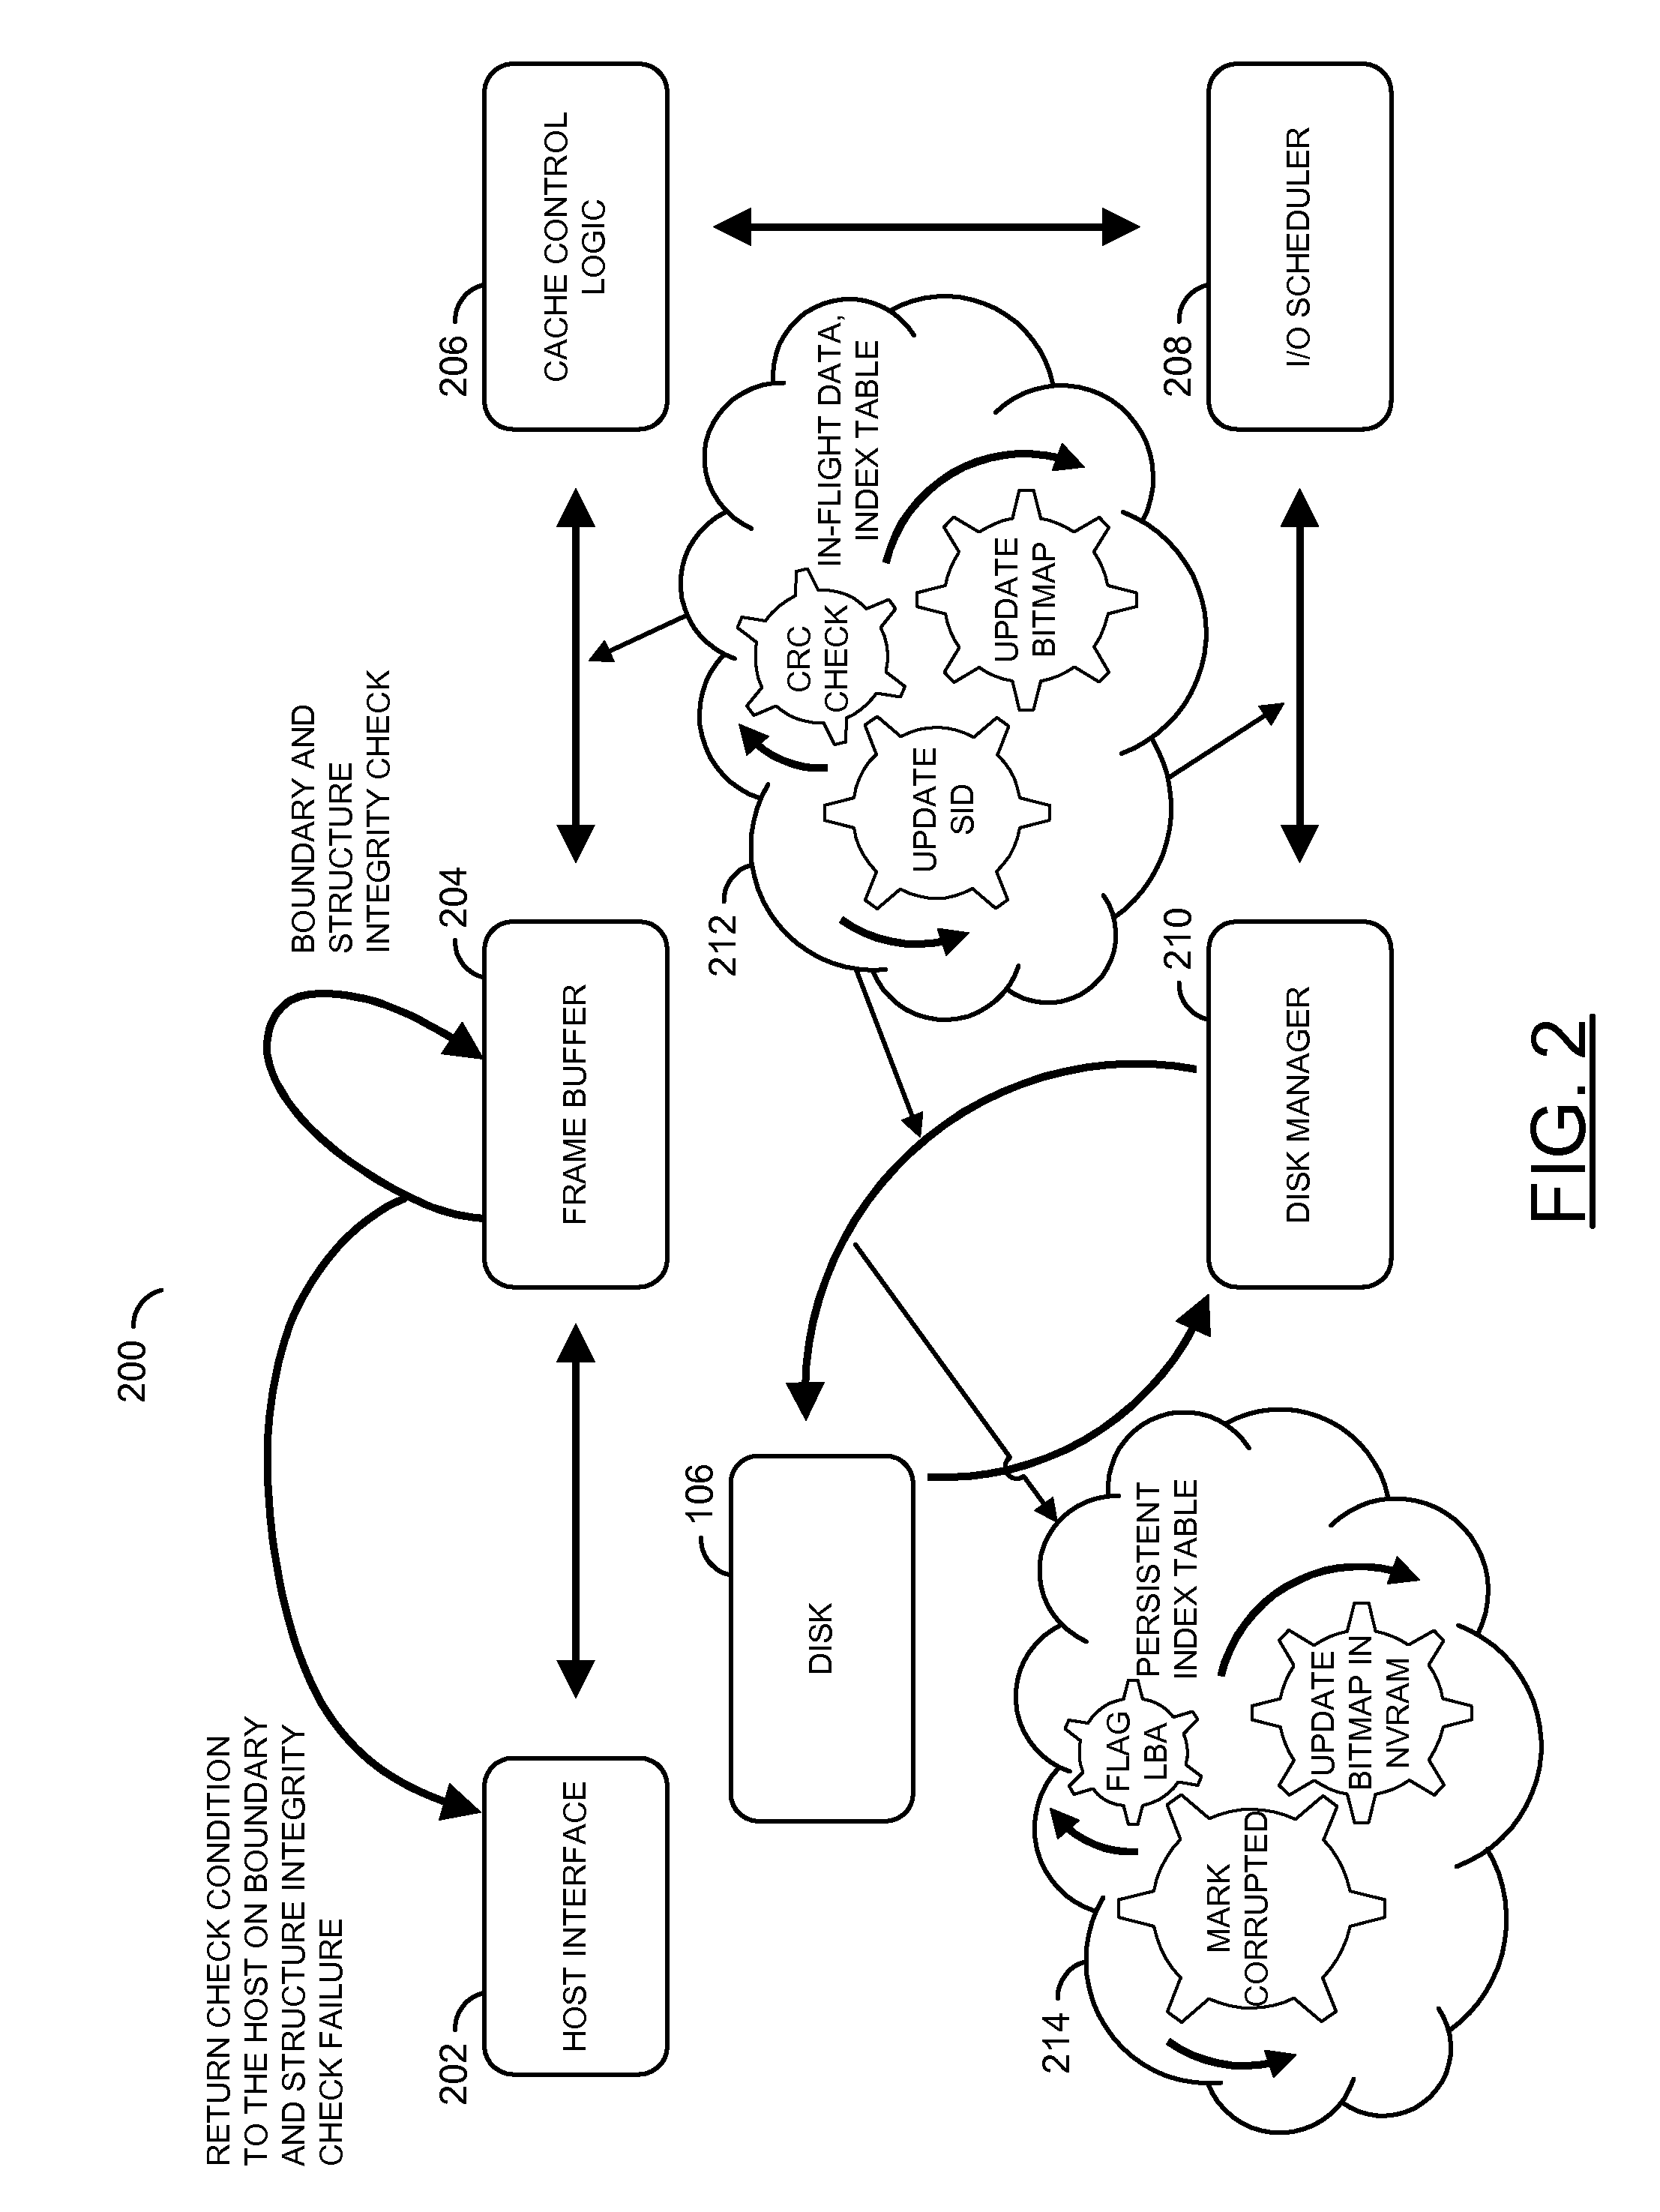 System and method to flag a source of data corruption in a storage subsystem using persistent source identifier bits